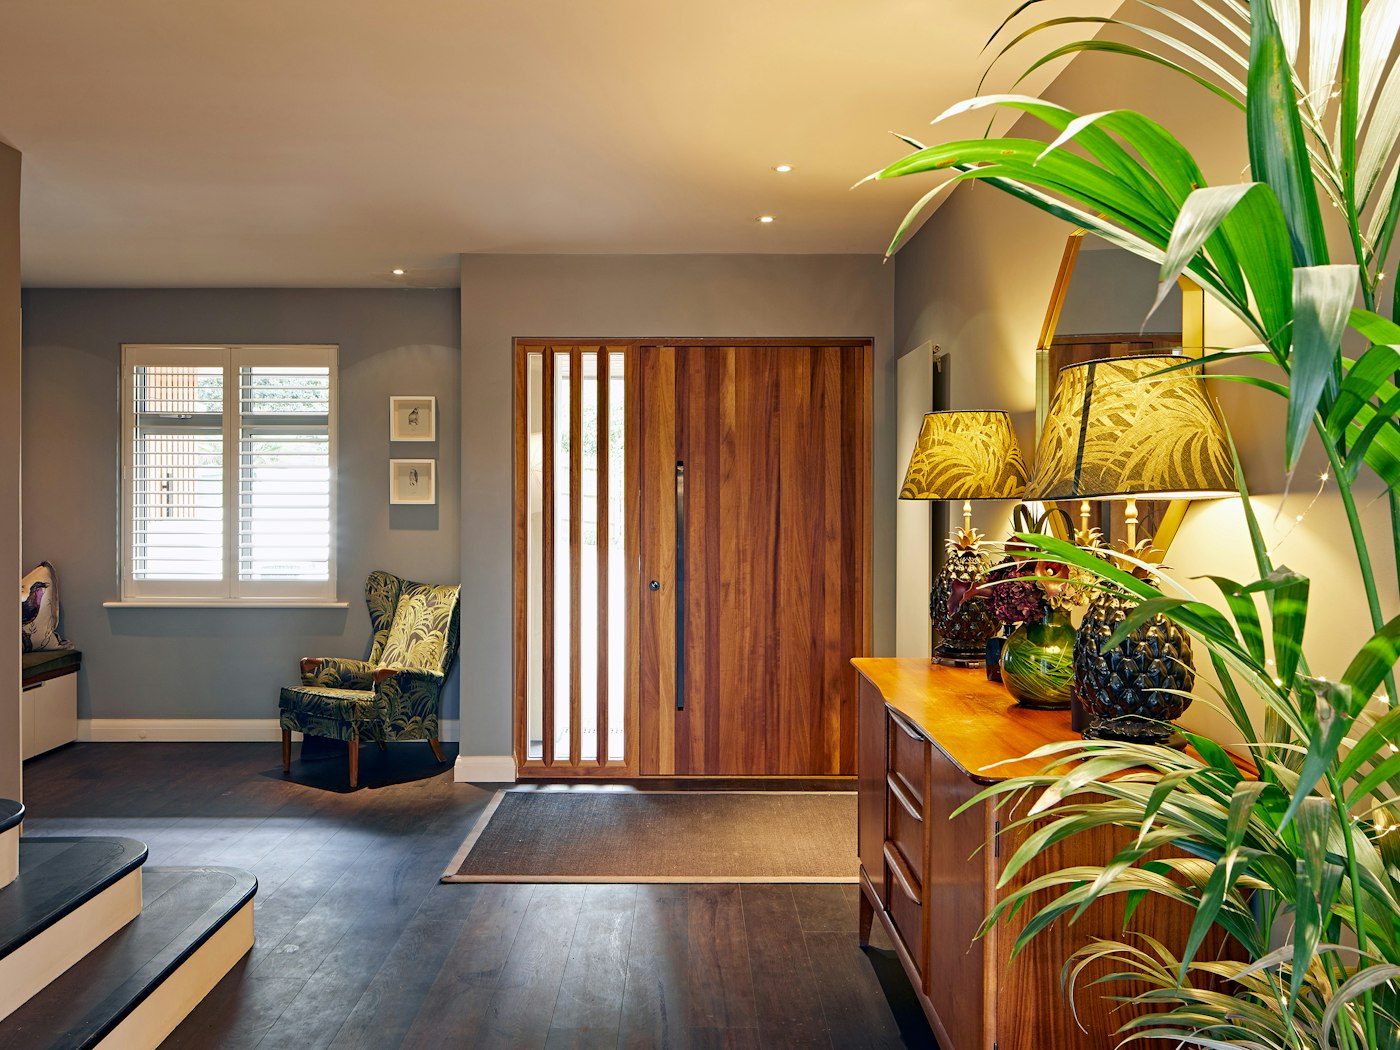 Fresh greenery and tropical-accented accessories give the hallway a burst of colour that lift the rich, dark flooring